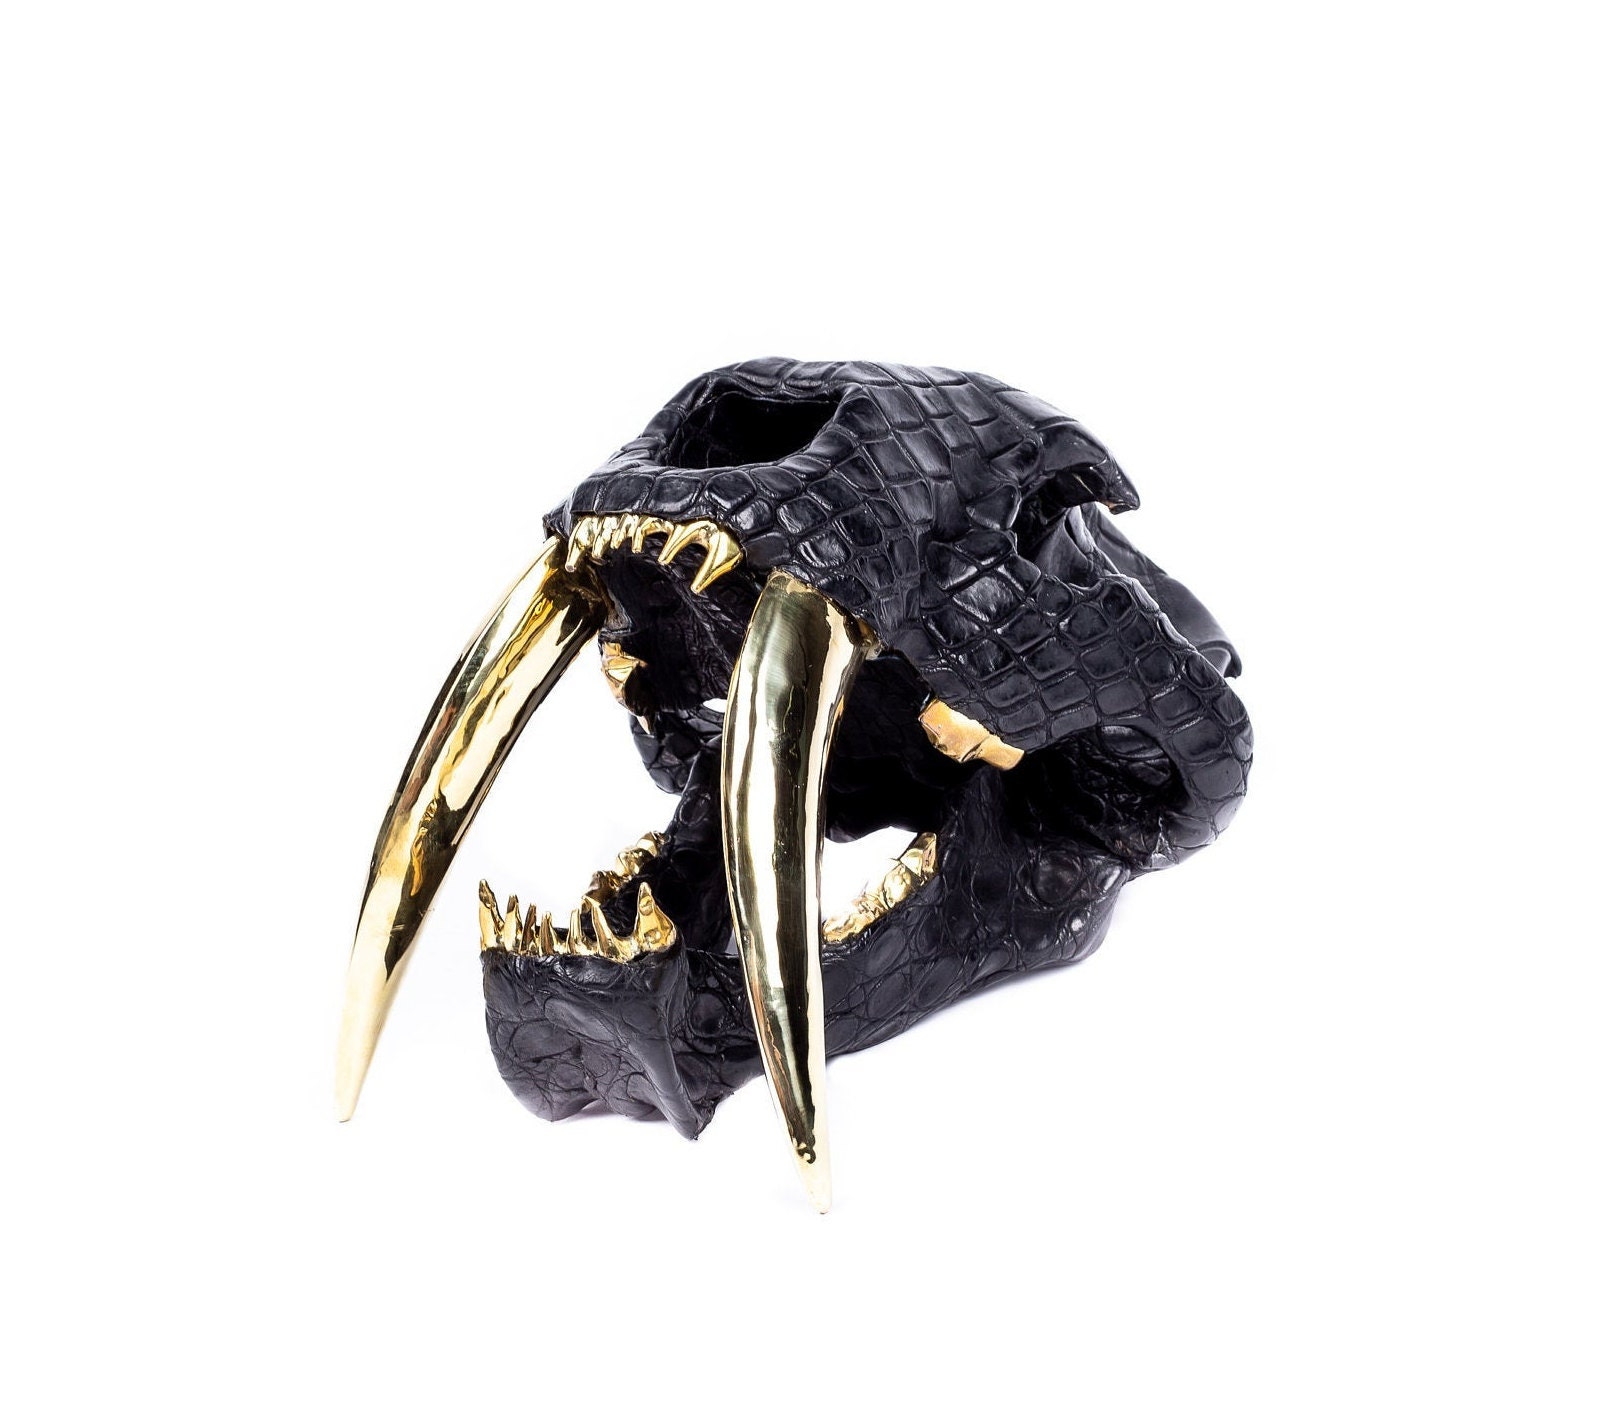 Saber Tooth Tiger Skull Replica With Leather Head And Metal Teeth